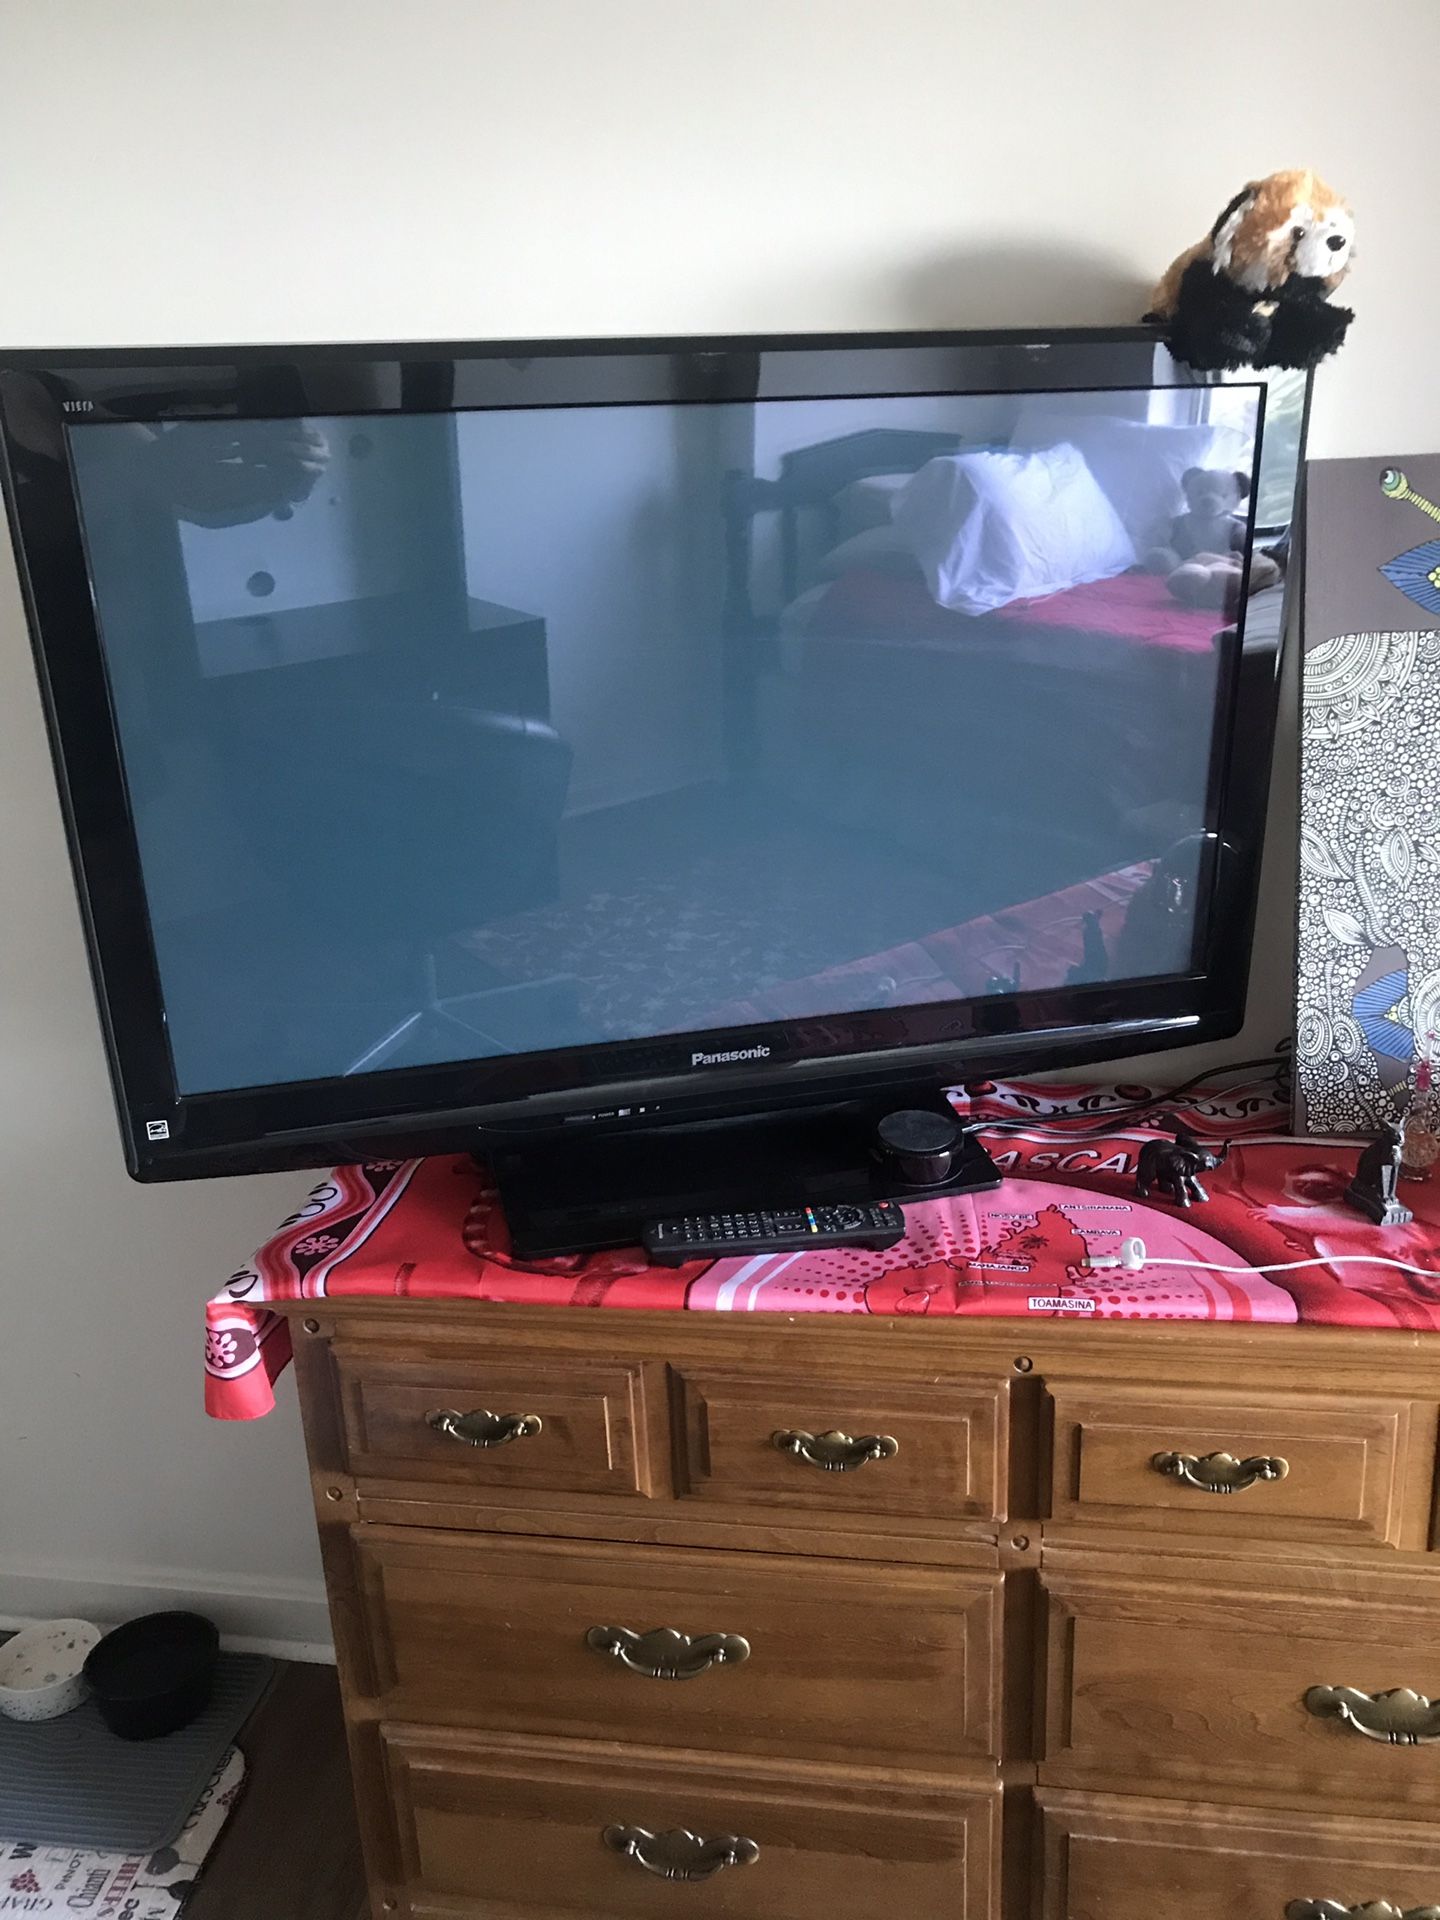 Panasonic TV with remote 40 inches